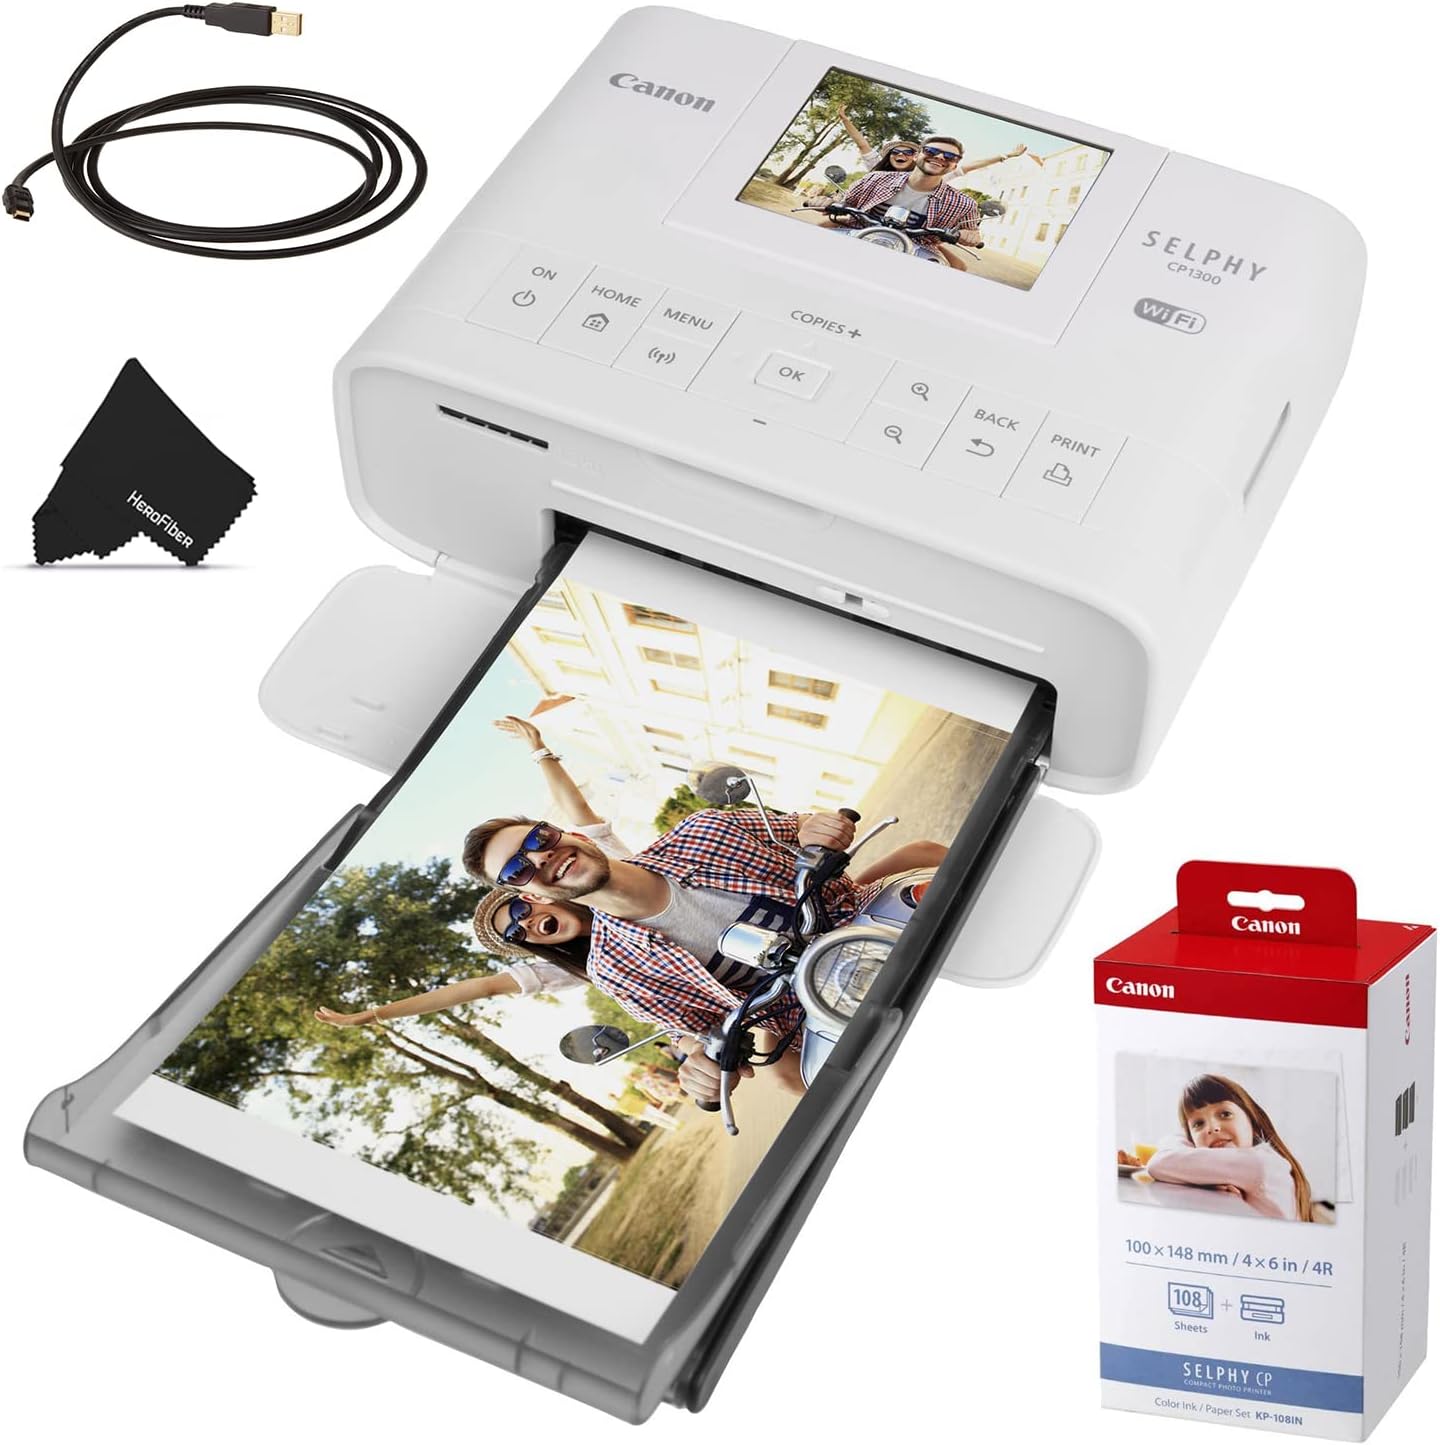 Review of Canon SELPHY CP1300 Wireless Compact Photo Printer (White) + Canon KP-108IN Color Ink Paper Set + USB Printer Cable + HeroFiber Ultra Gentle Cleaning Cloth